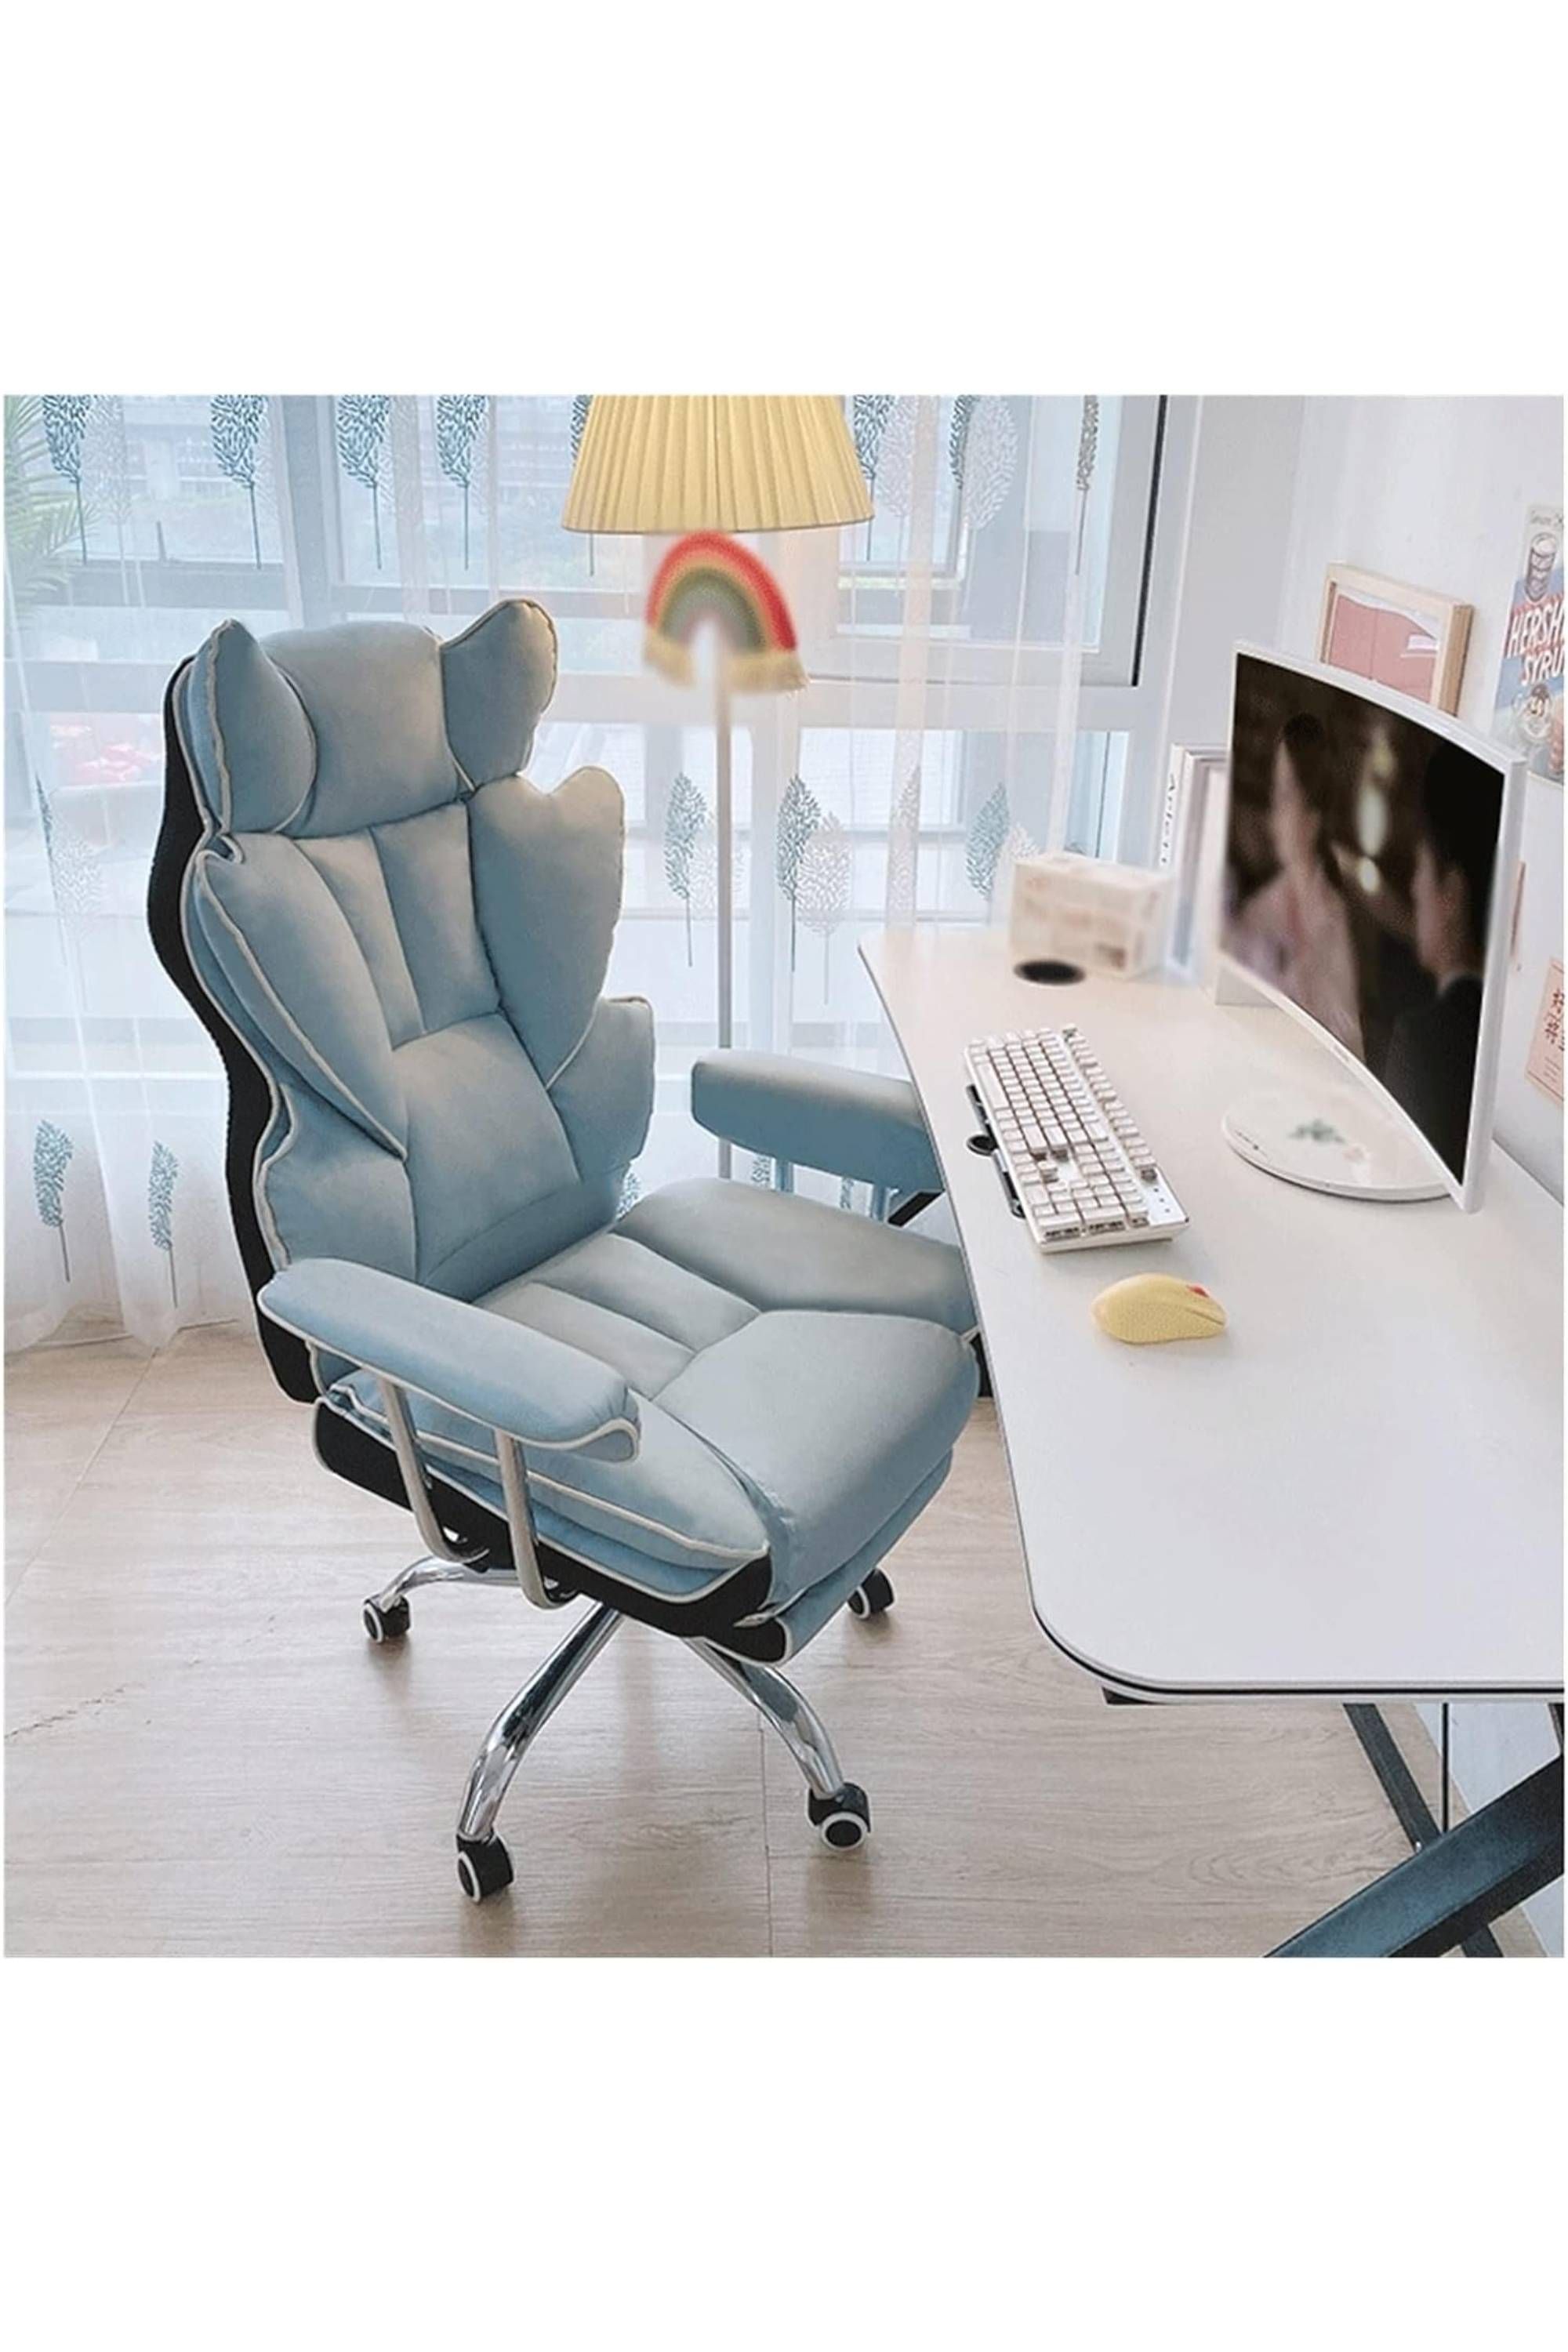 HNKDD Oversized Comfortable Office Chair